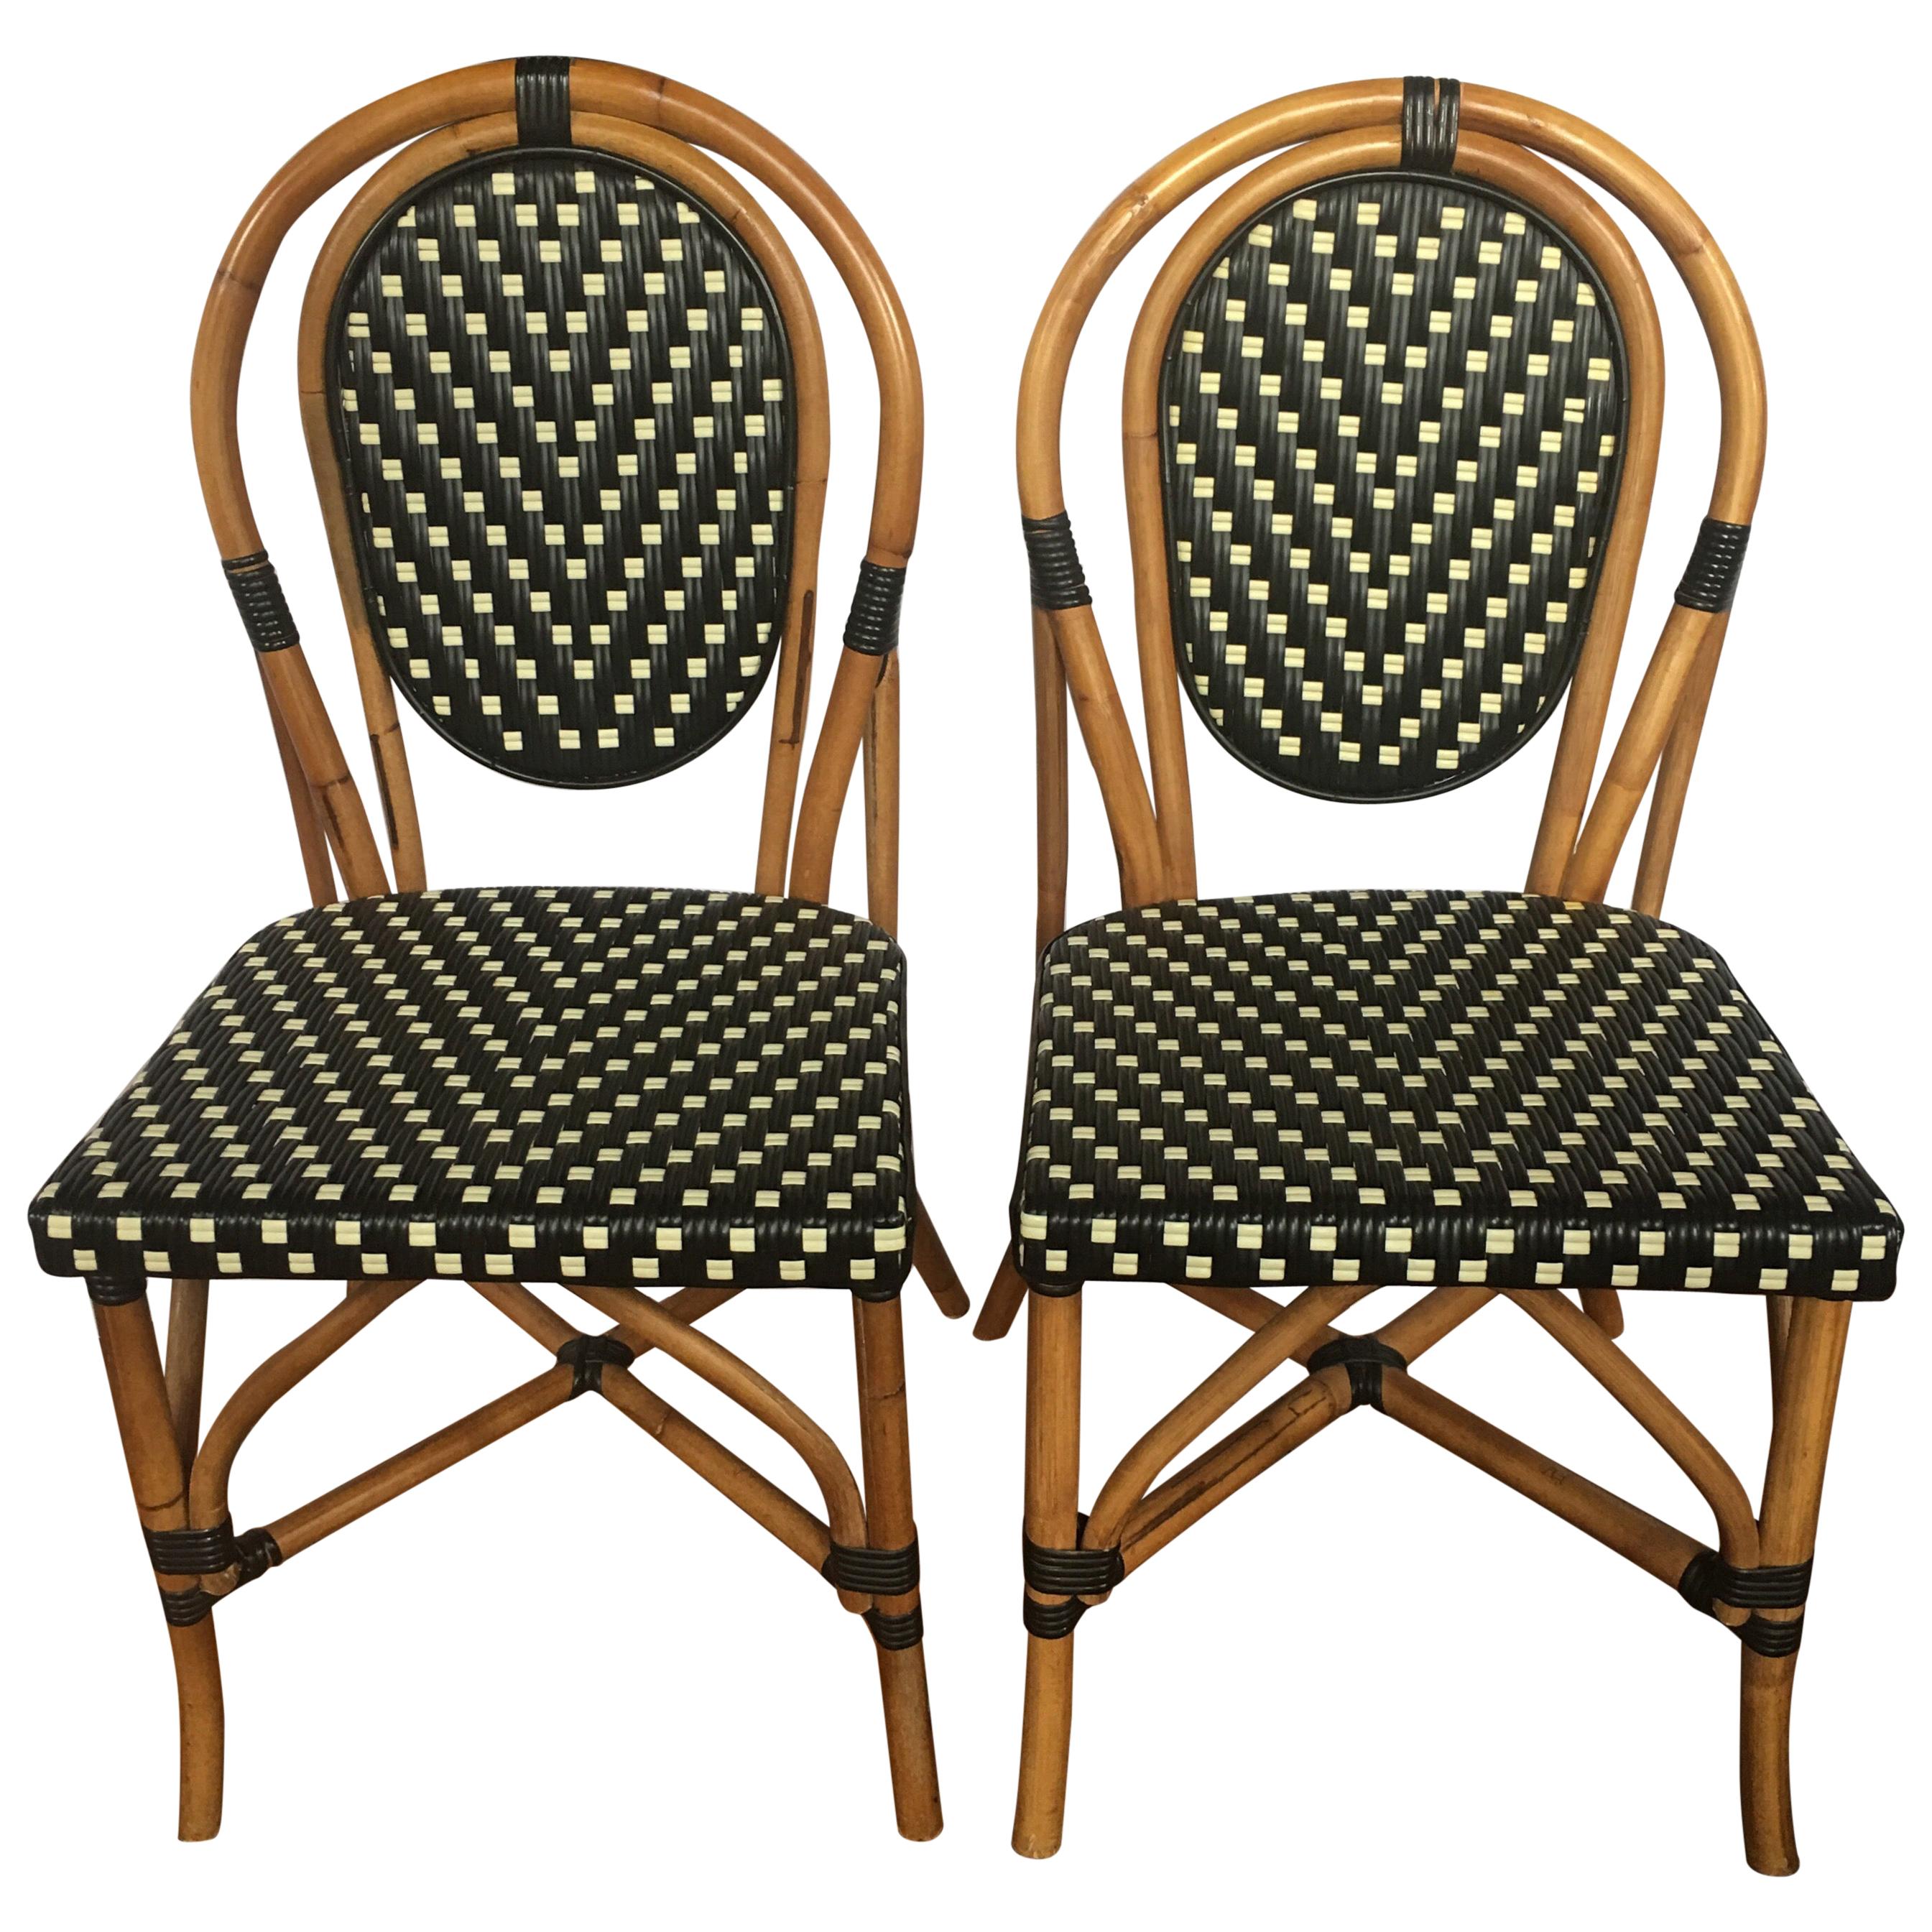 French Style Parisian Cafe Bistro Rattan Dining Chairs, Pair